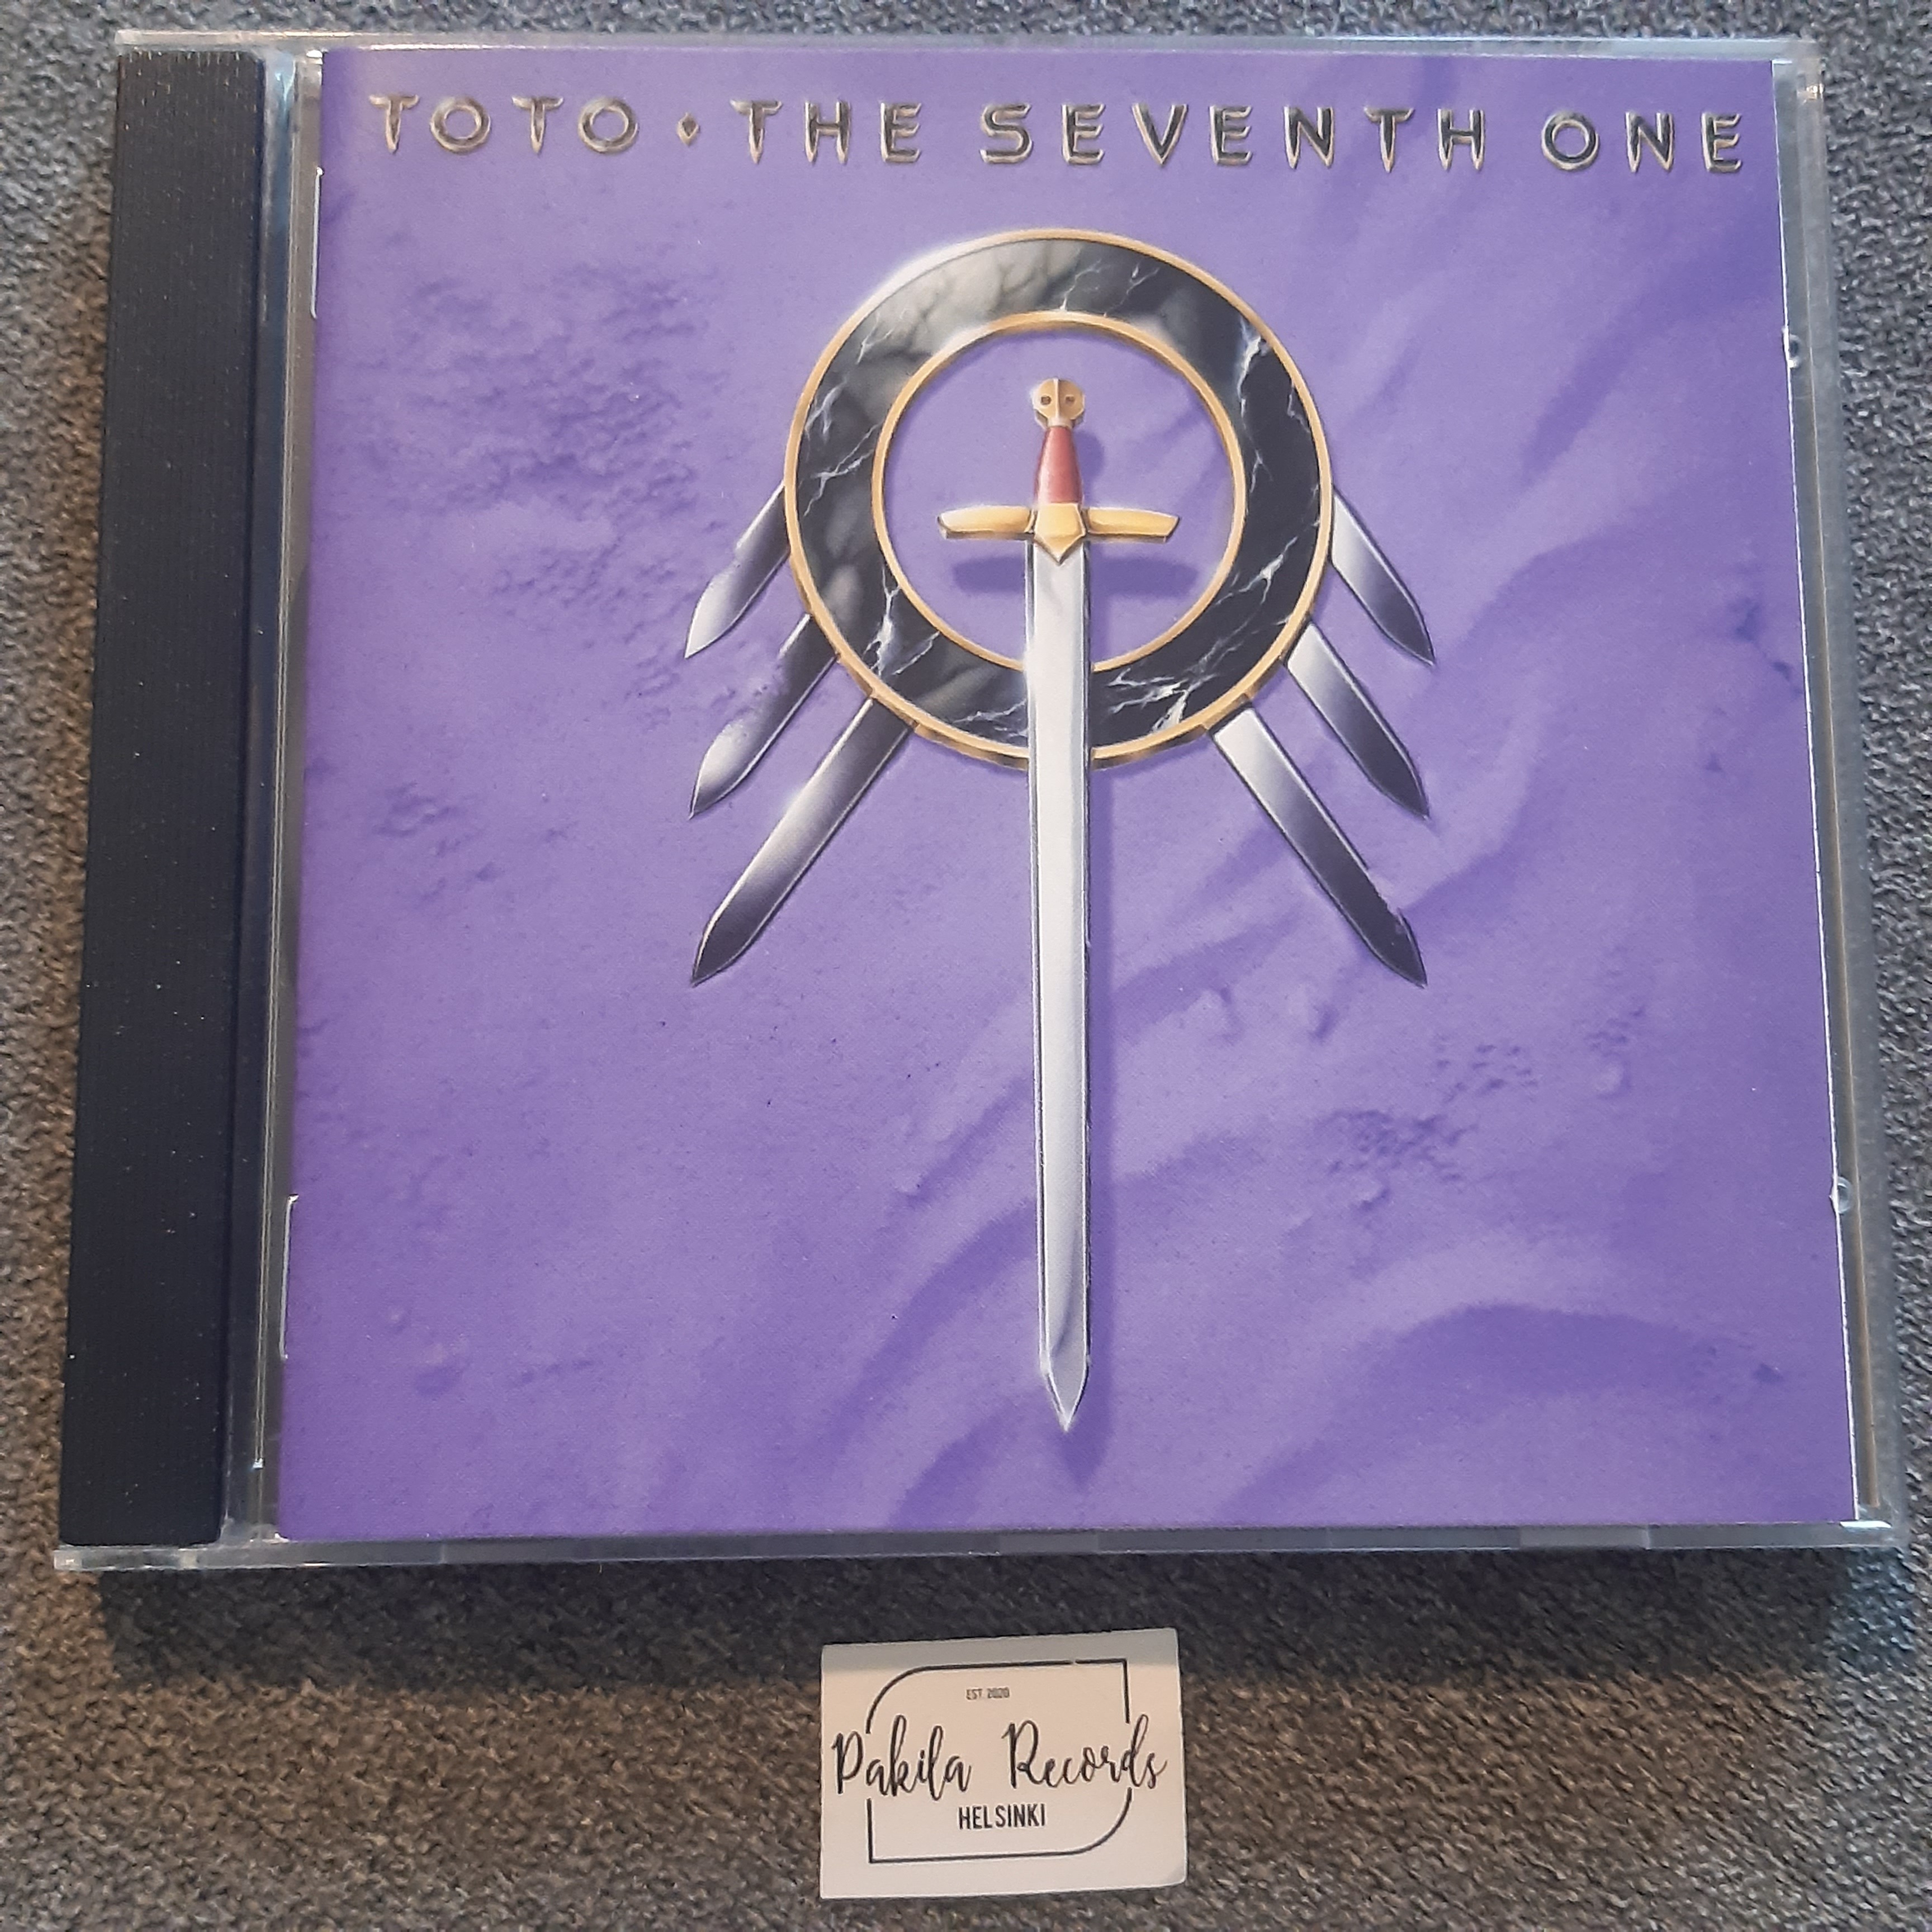 Toto - The Seventh One - CD (käytetty)